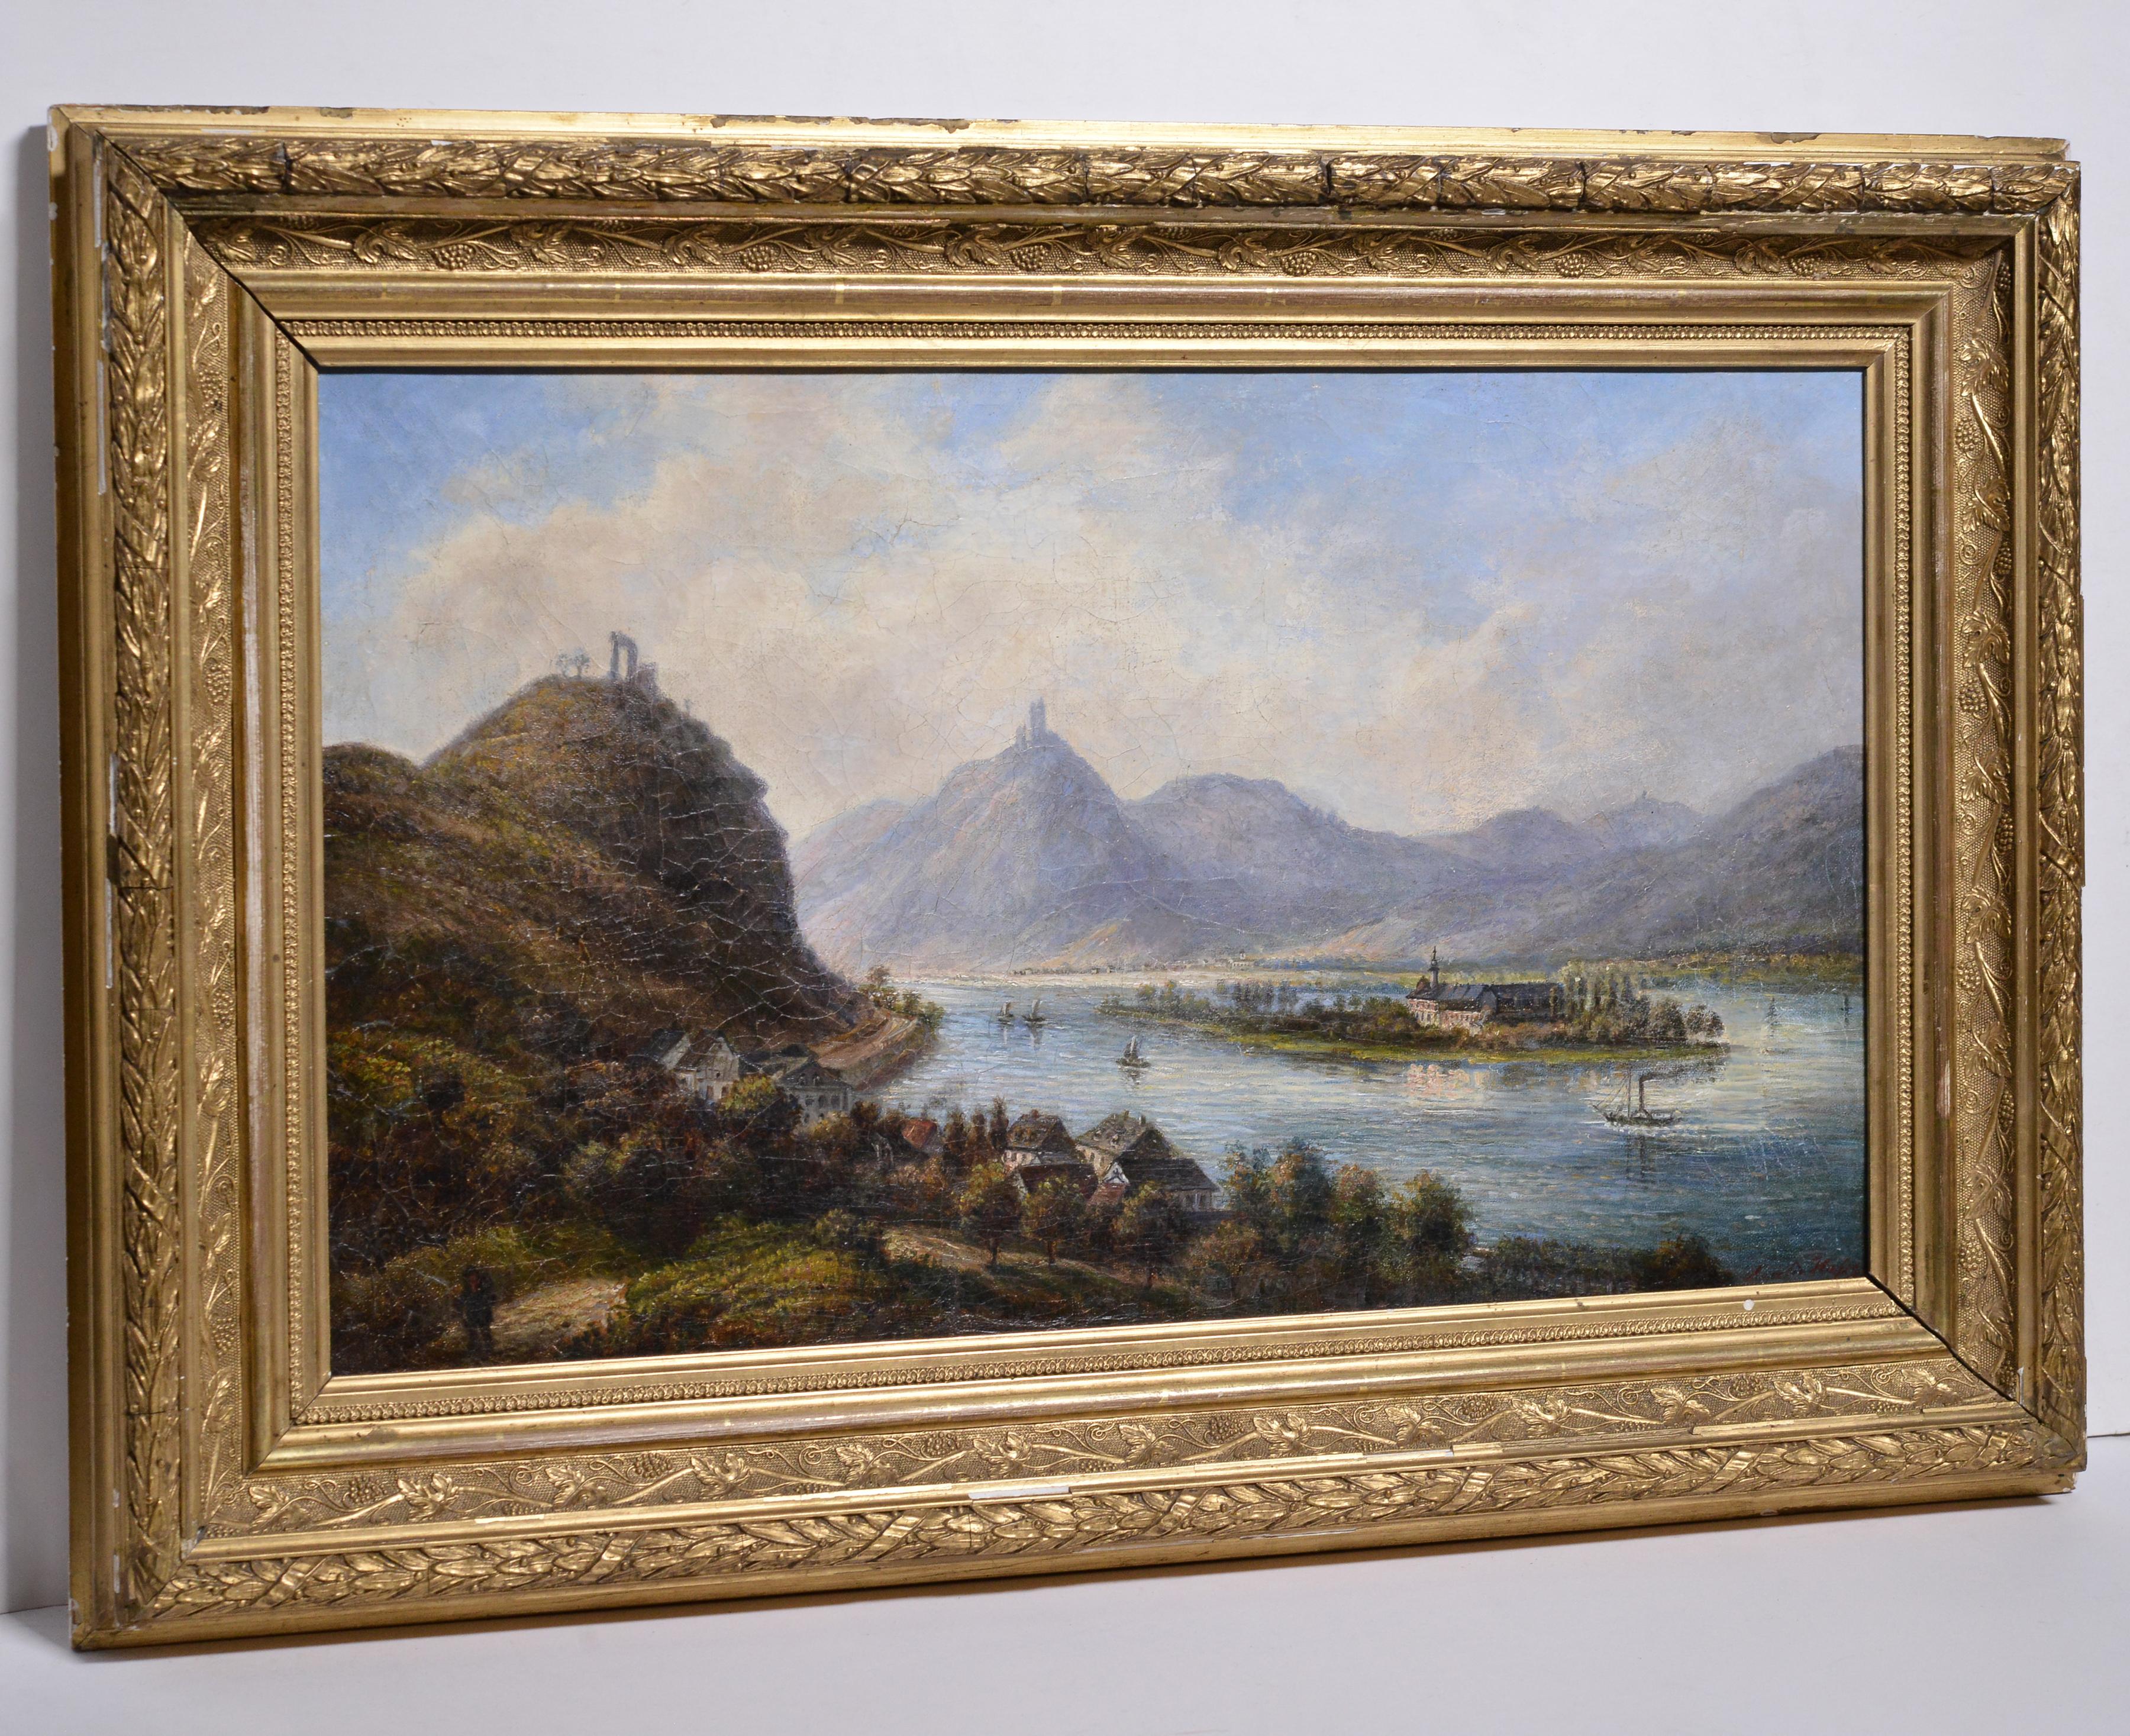 This artwork captures all the beauty of the German valley in the lower Alps, showcasing a breathtaking scenery that includes ruins atop high hills, hazed mountains in the distance, steamships and sailing boats on the river (Danube or Rhin?), and